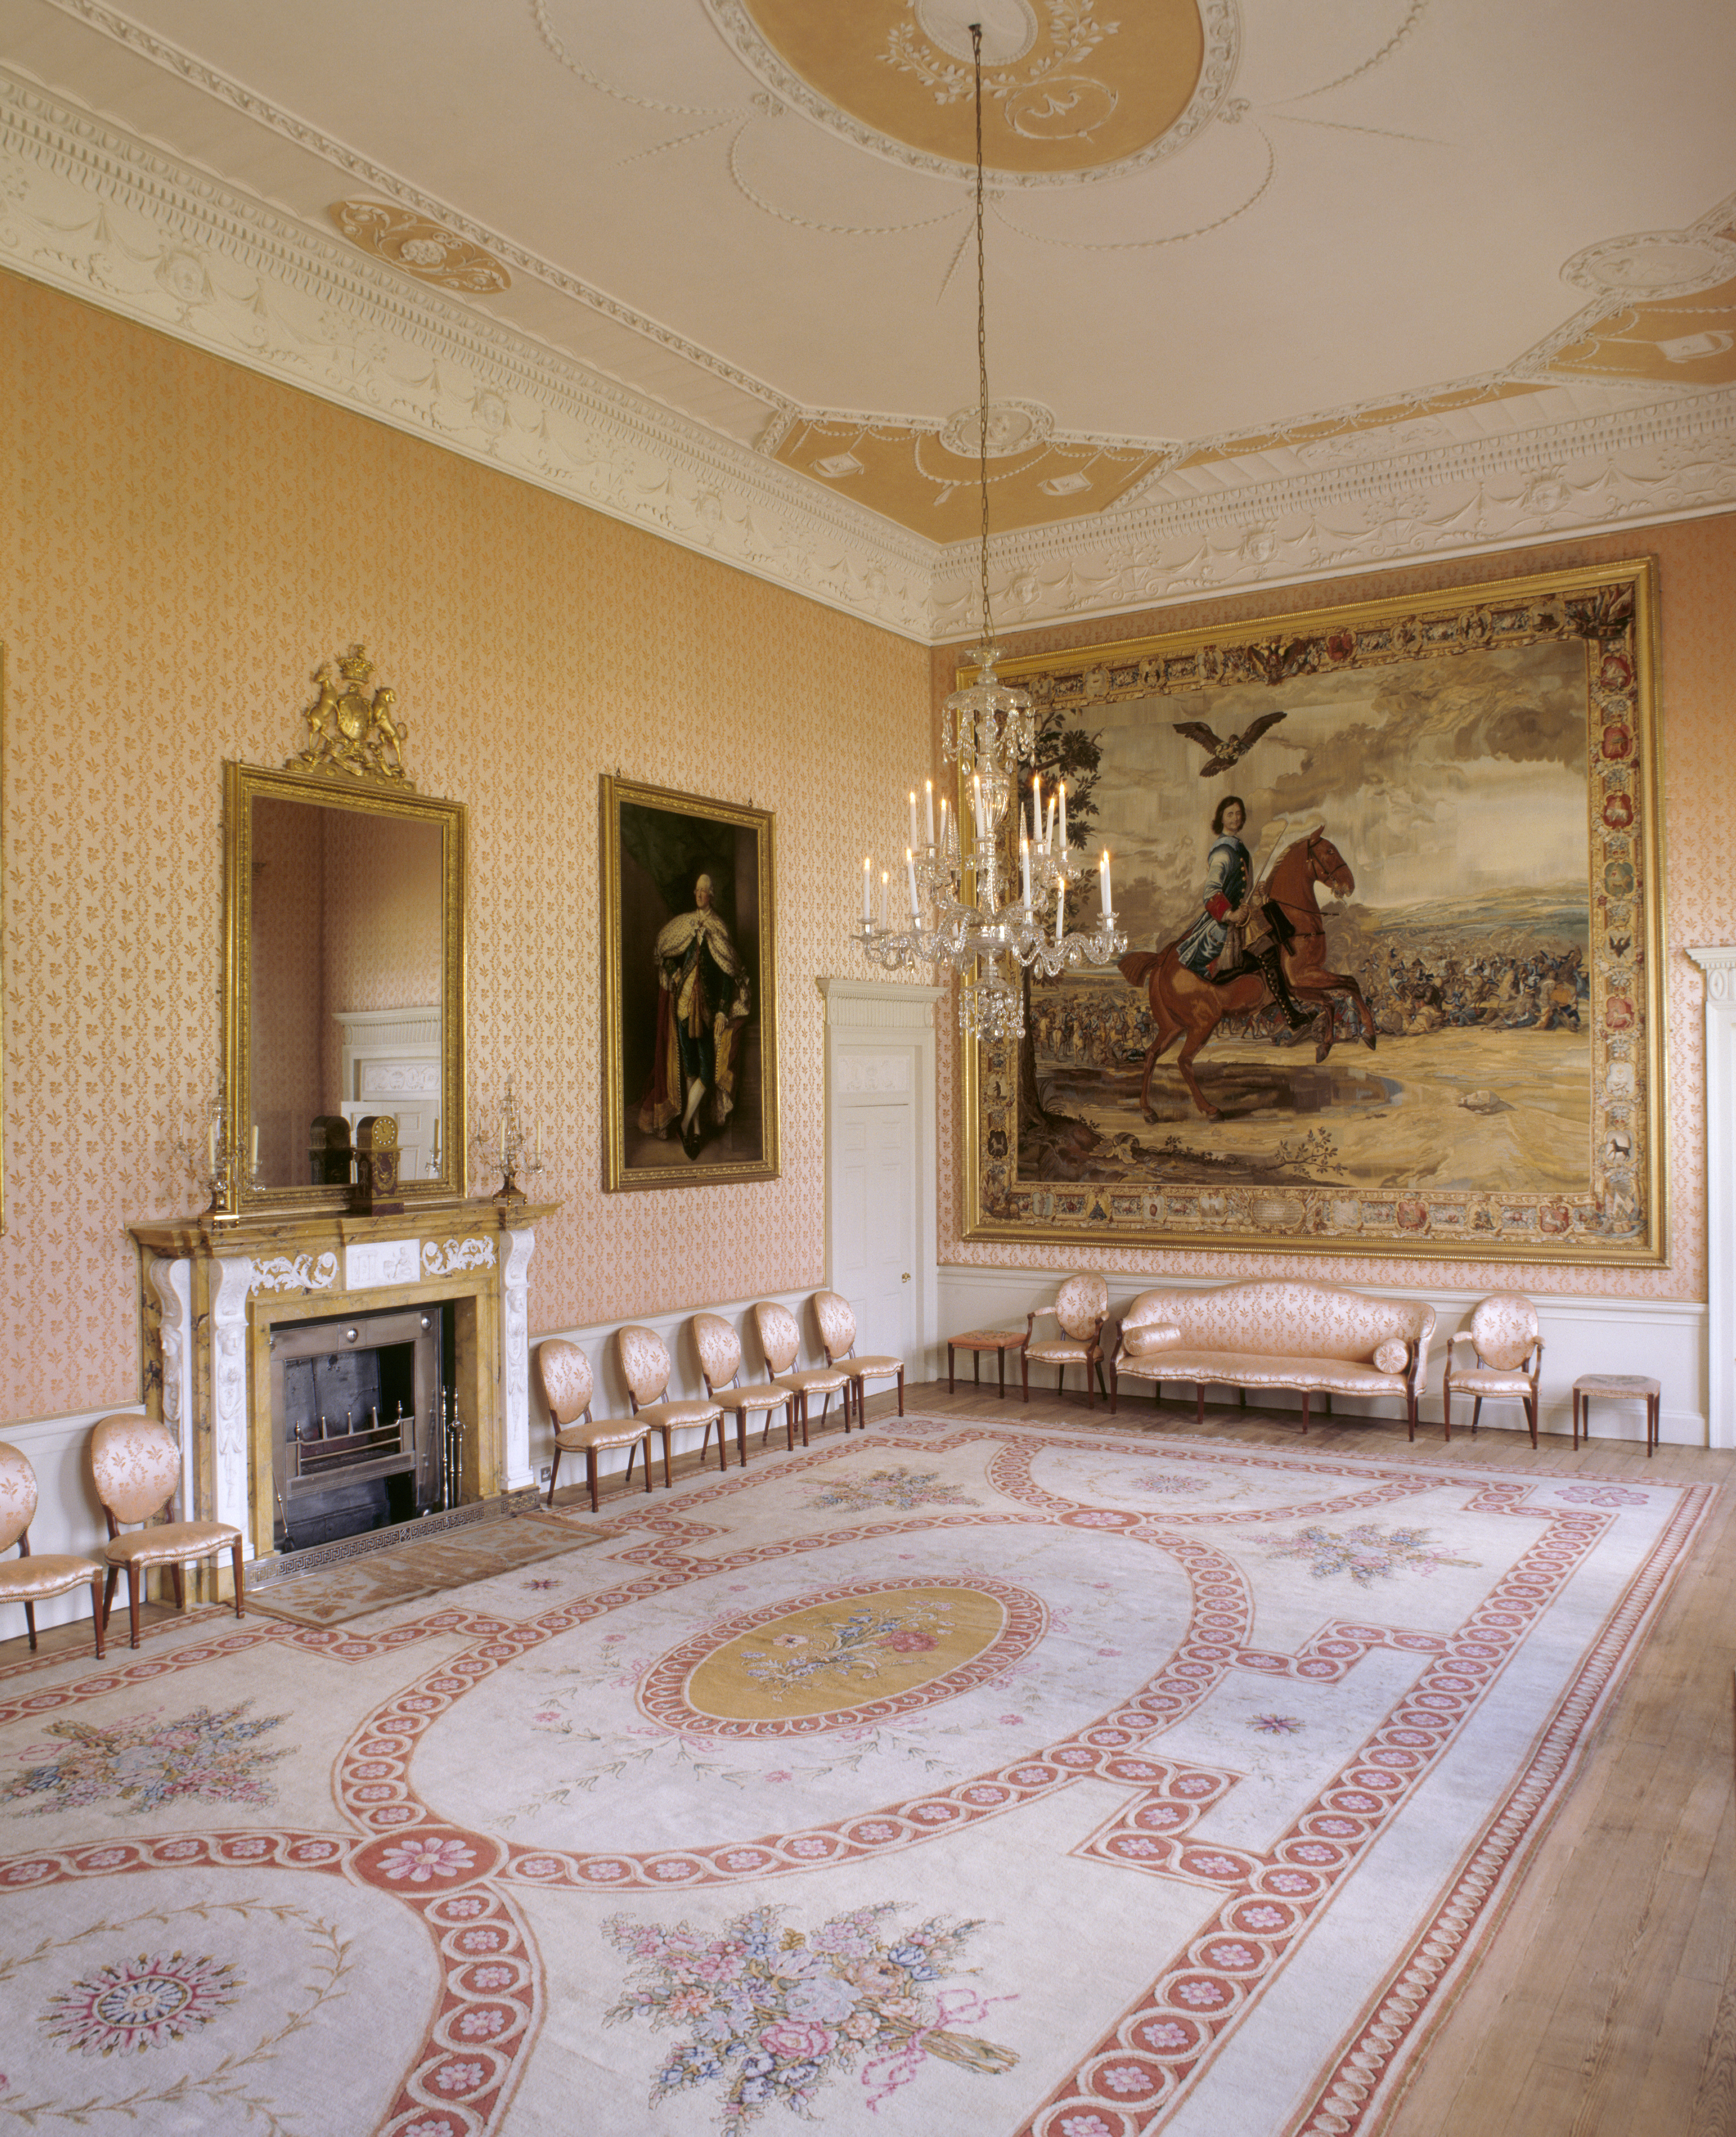 'Peter the Great' Room at Blickling Hall, with the tapestry of Peter the Great triumphing over the Swedes in 1709